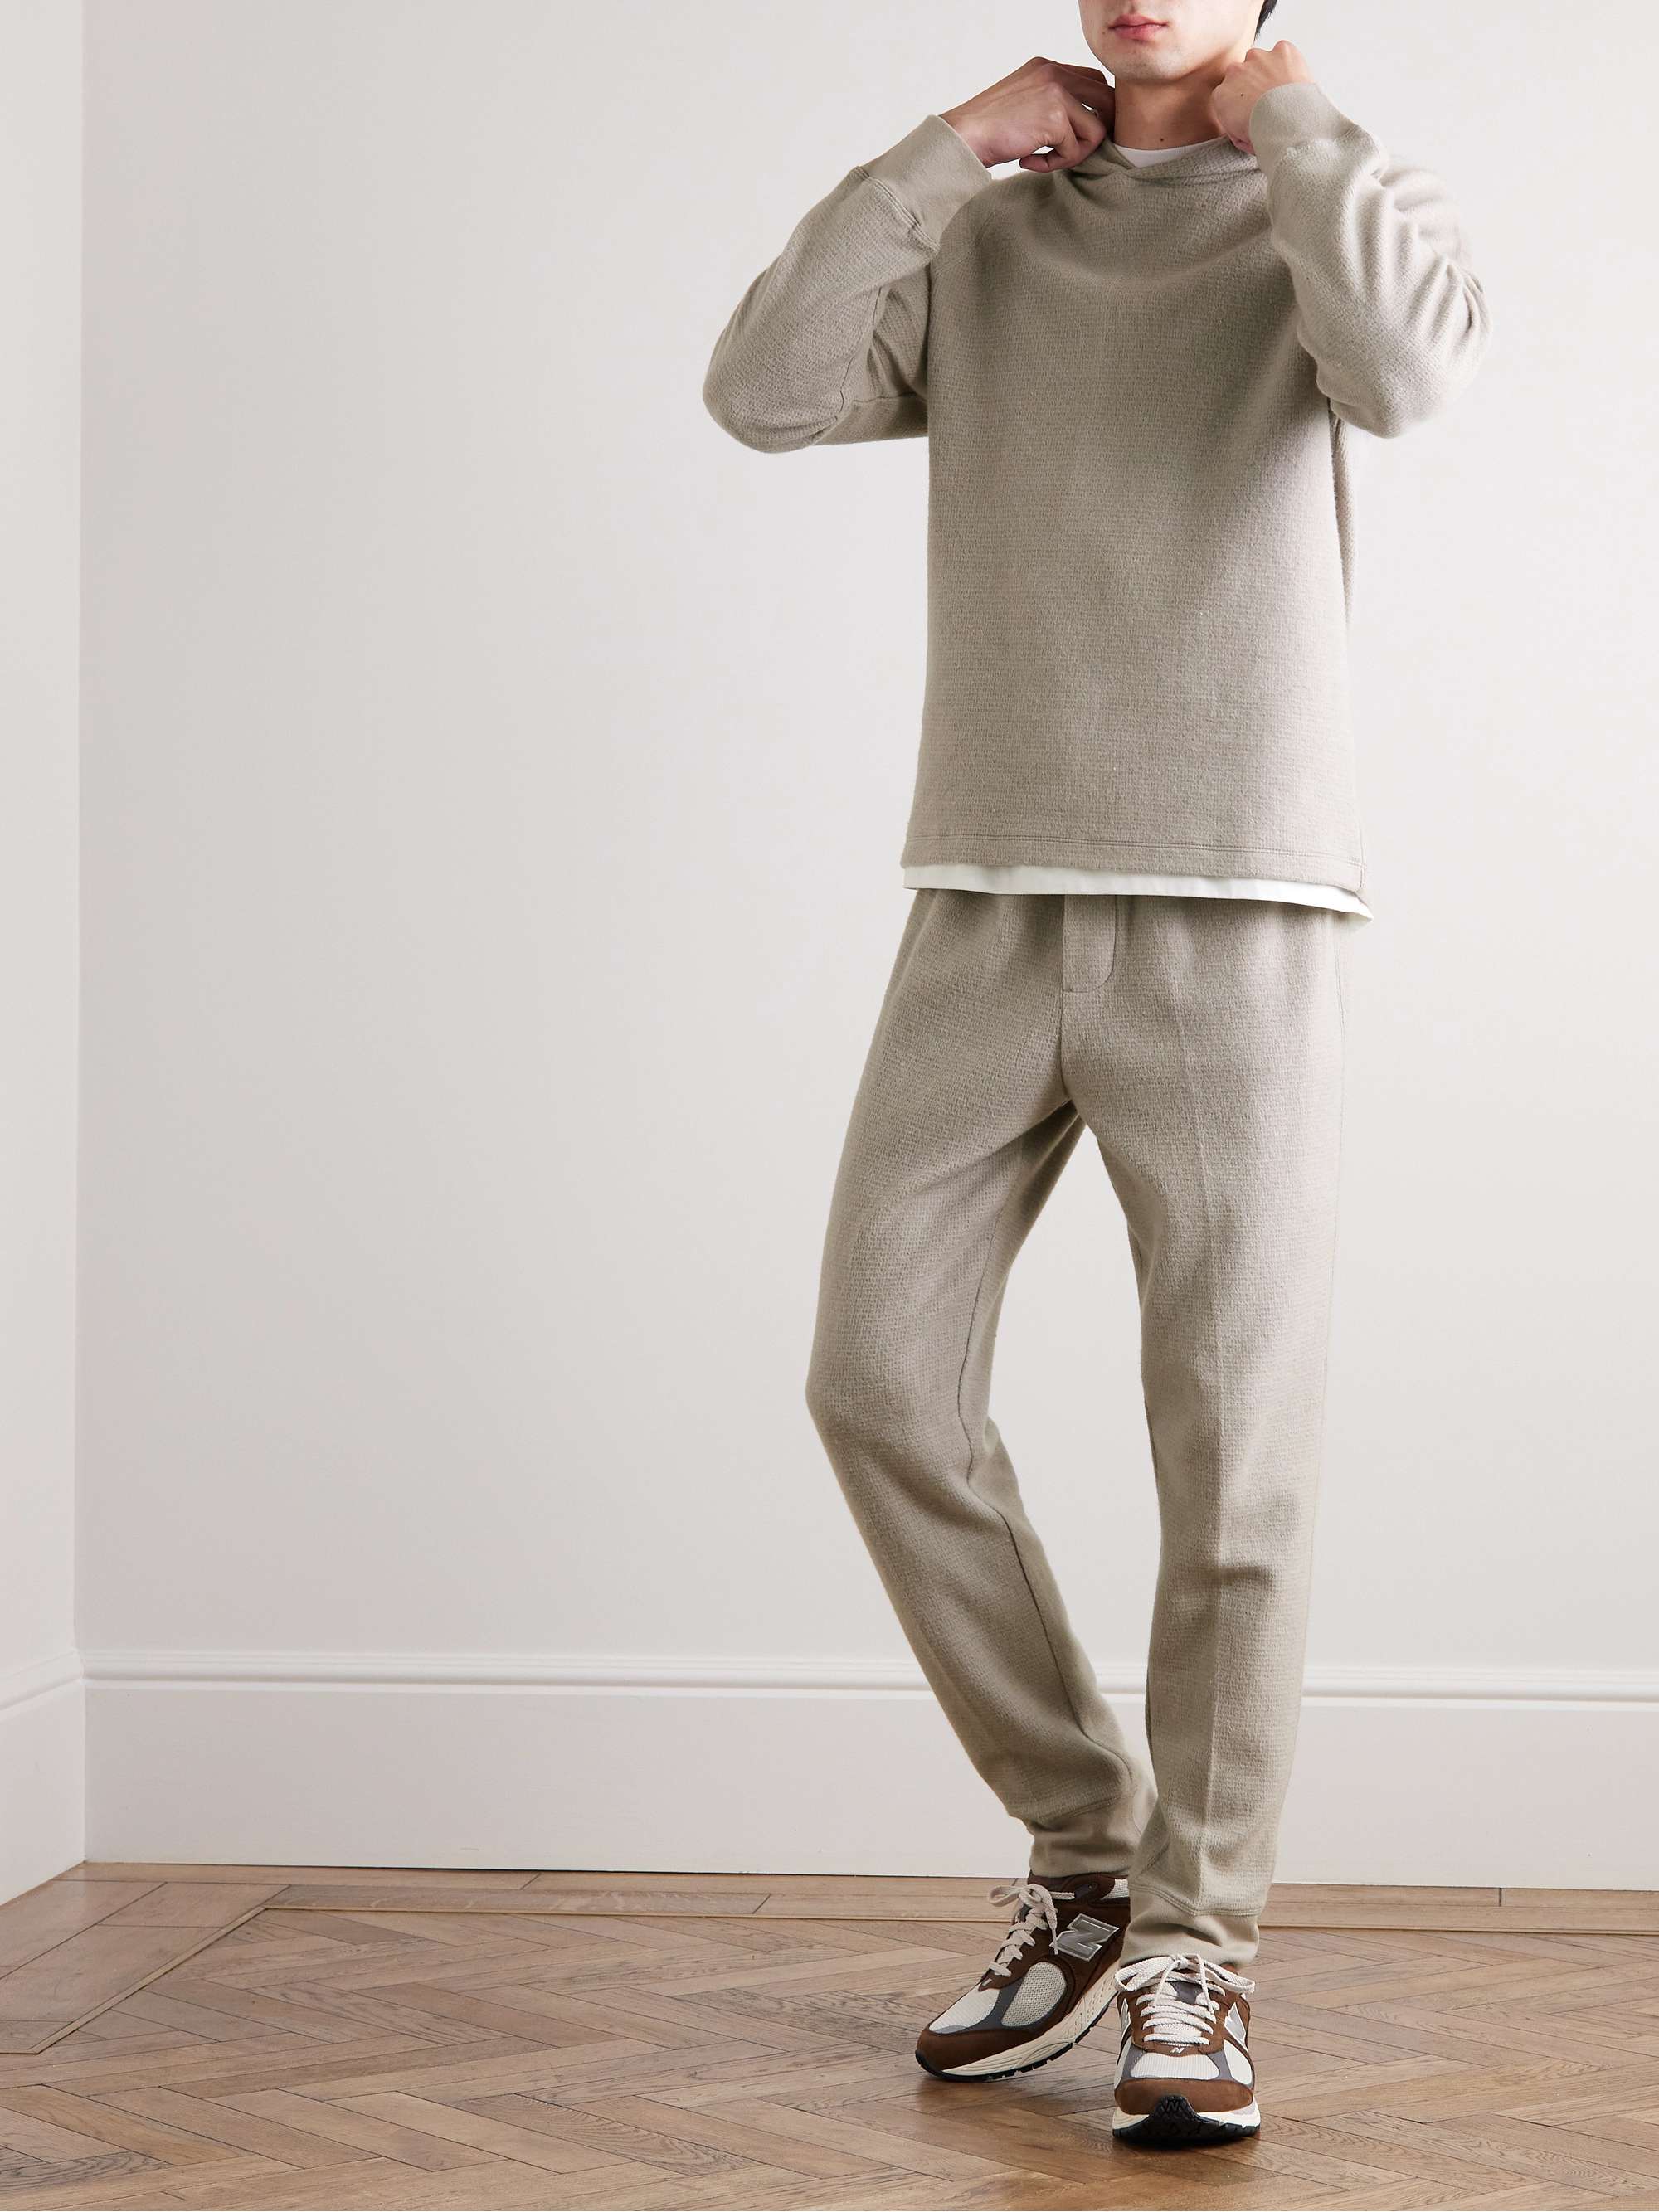 Gray Thermal Waffle-Knit Brushed Cotton and Cashmere-Blend Sweatpants |  JAMES PERSE | MR PORTER